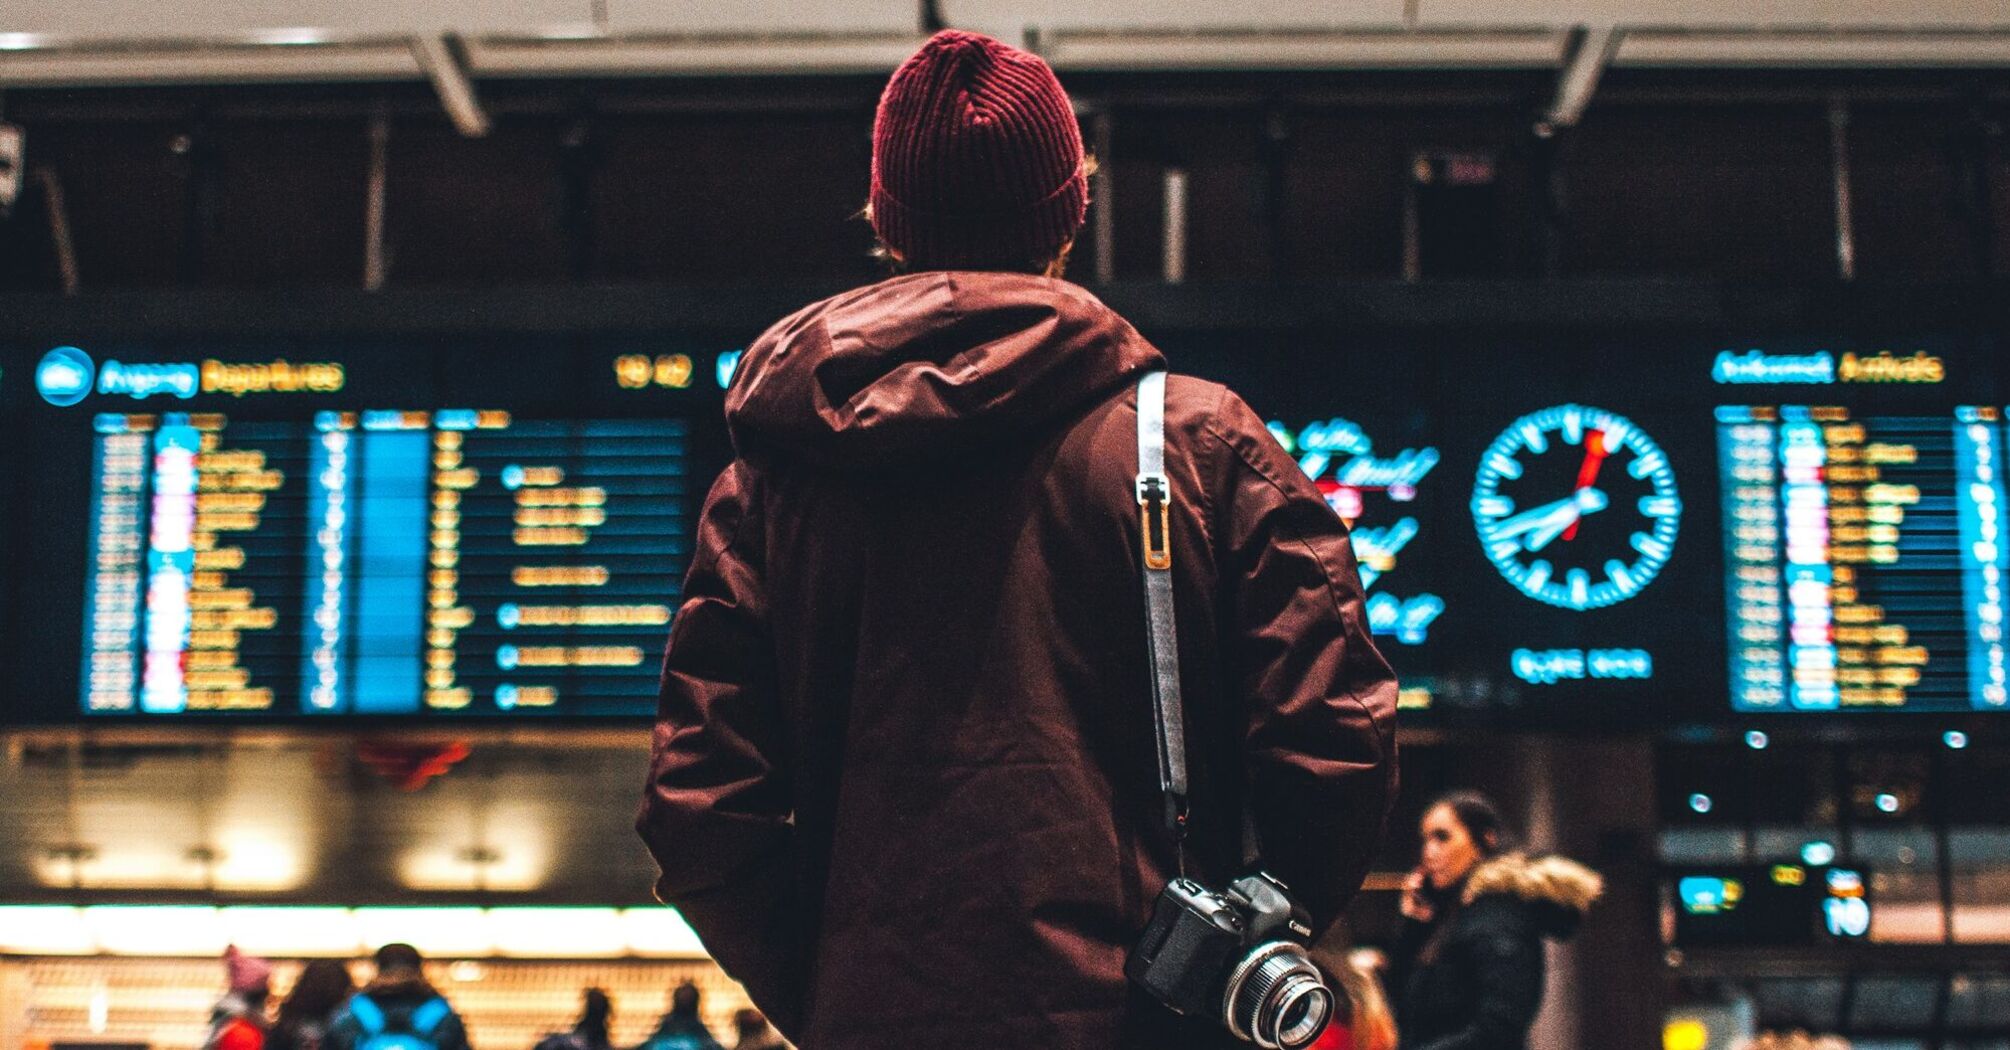 A traveler looking at departure boards in an airport